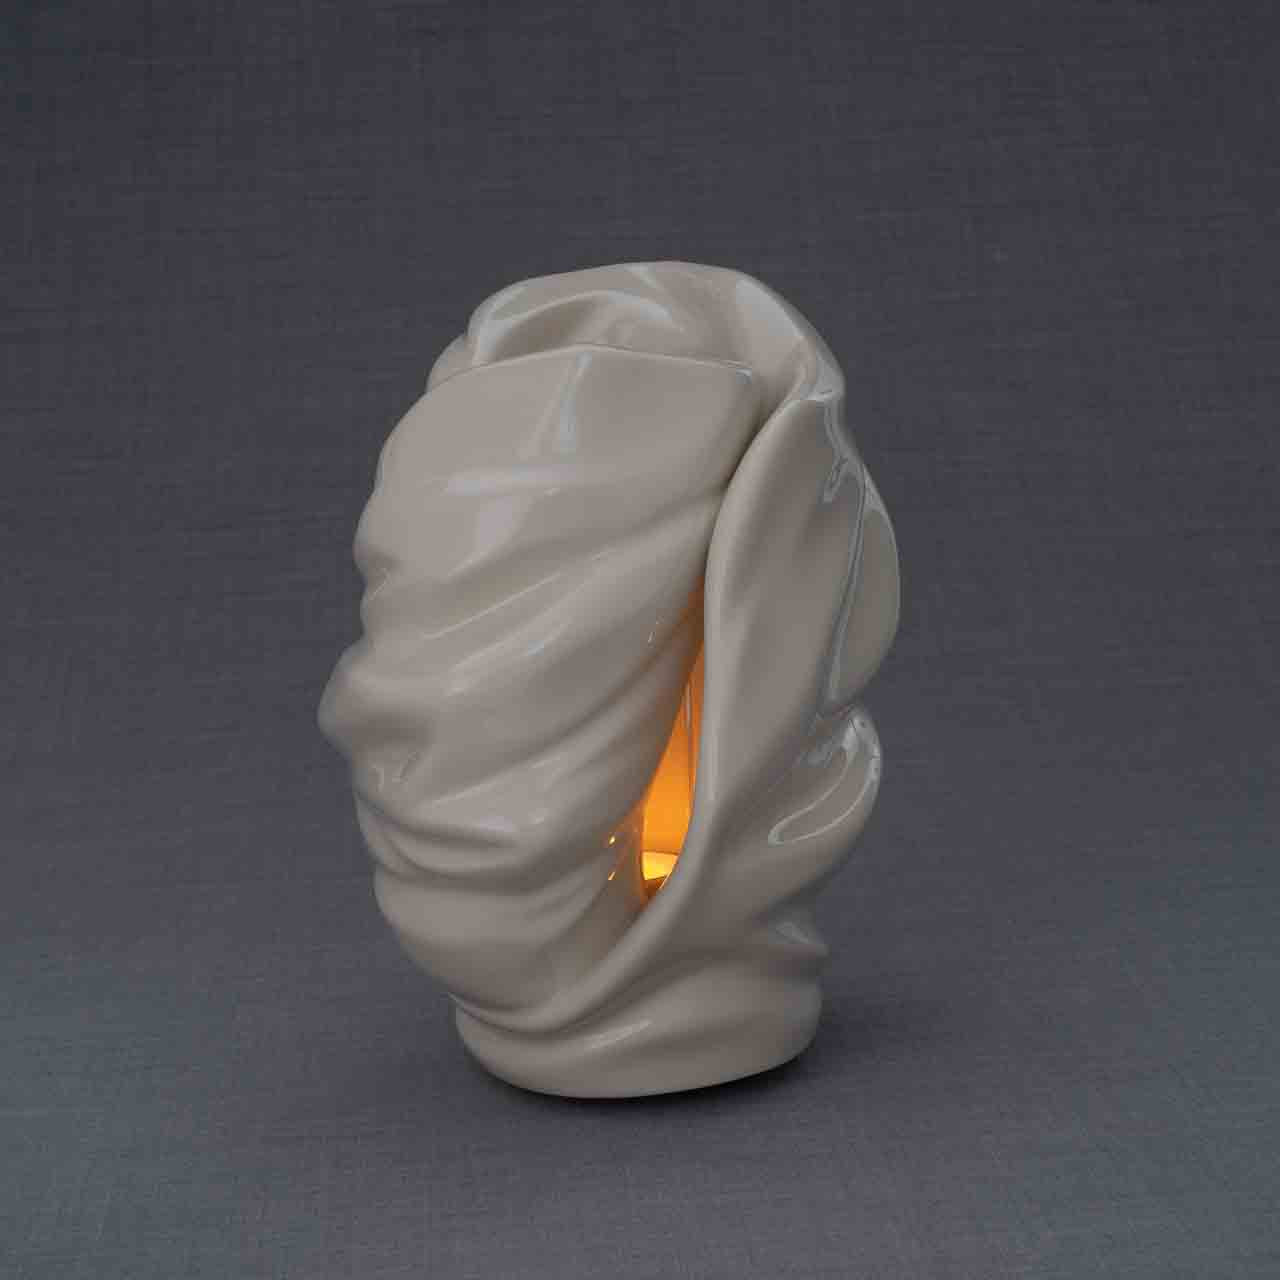 Light Cremation Urn for Ashes in Cream Turned To The Side Grey Background